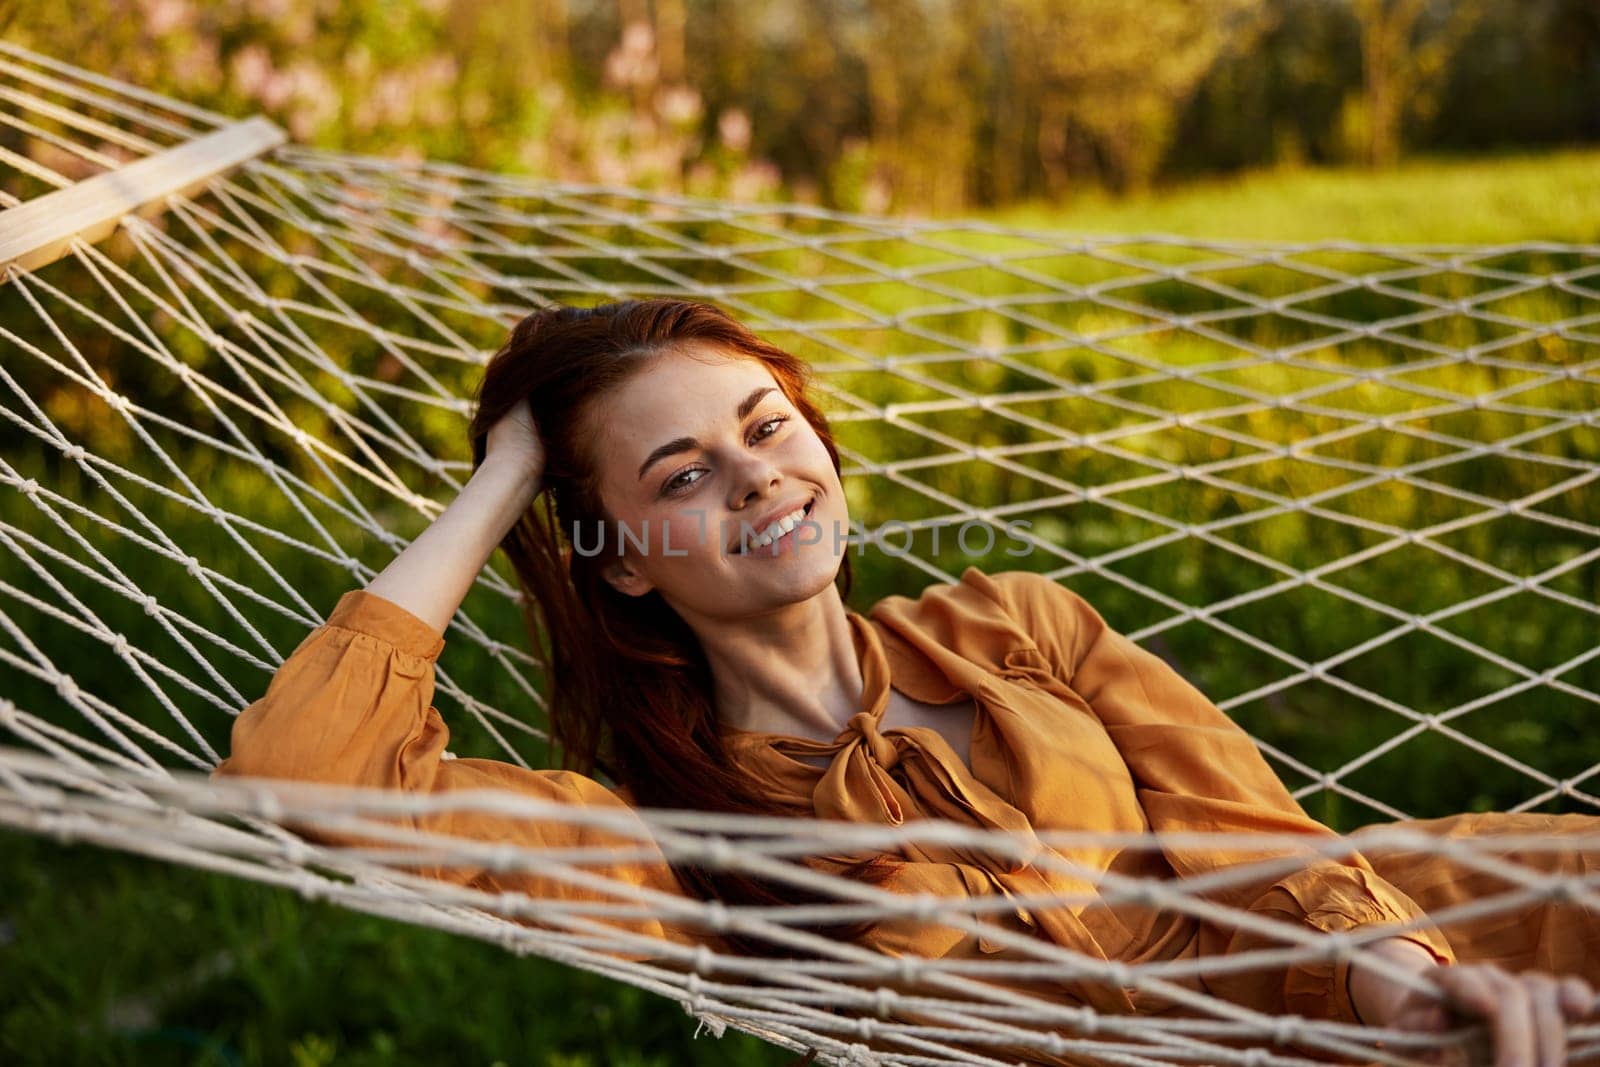 a happy woman is resting in a mesh hammock, resting her head on her hand, smiling happily looking at the camera, enjoying a sunny day. High quality photo